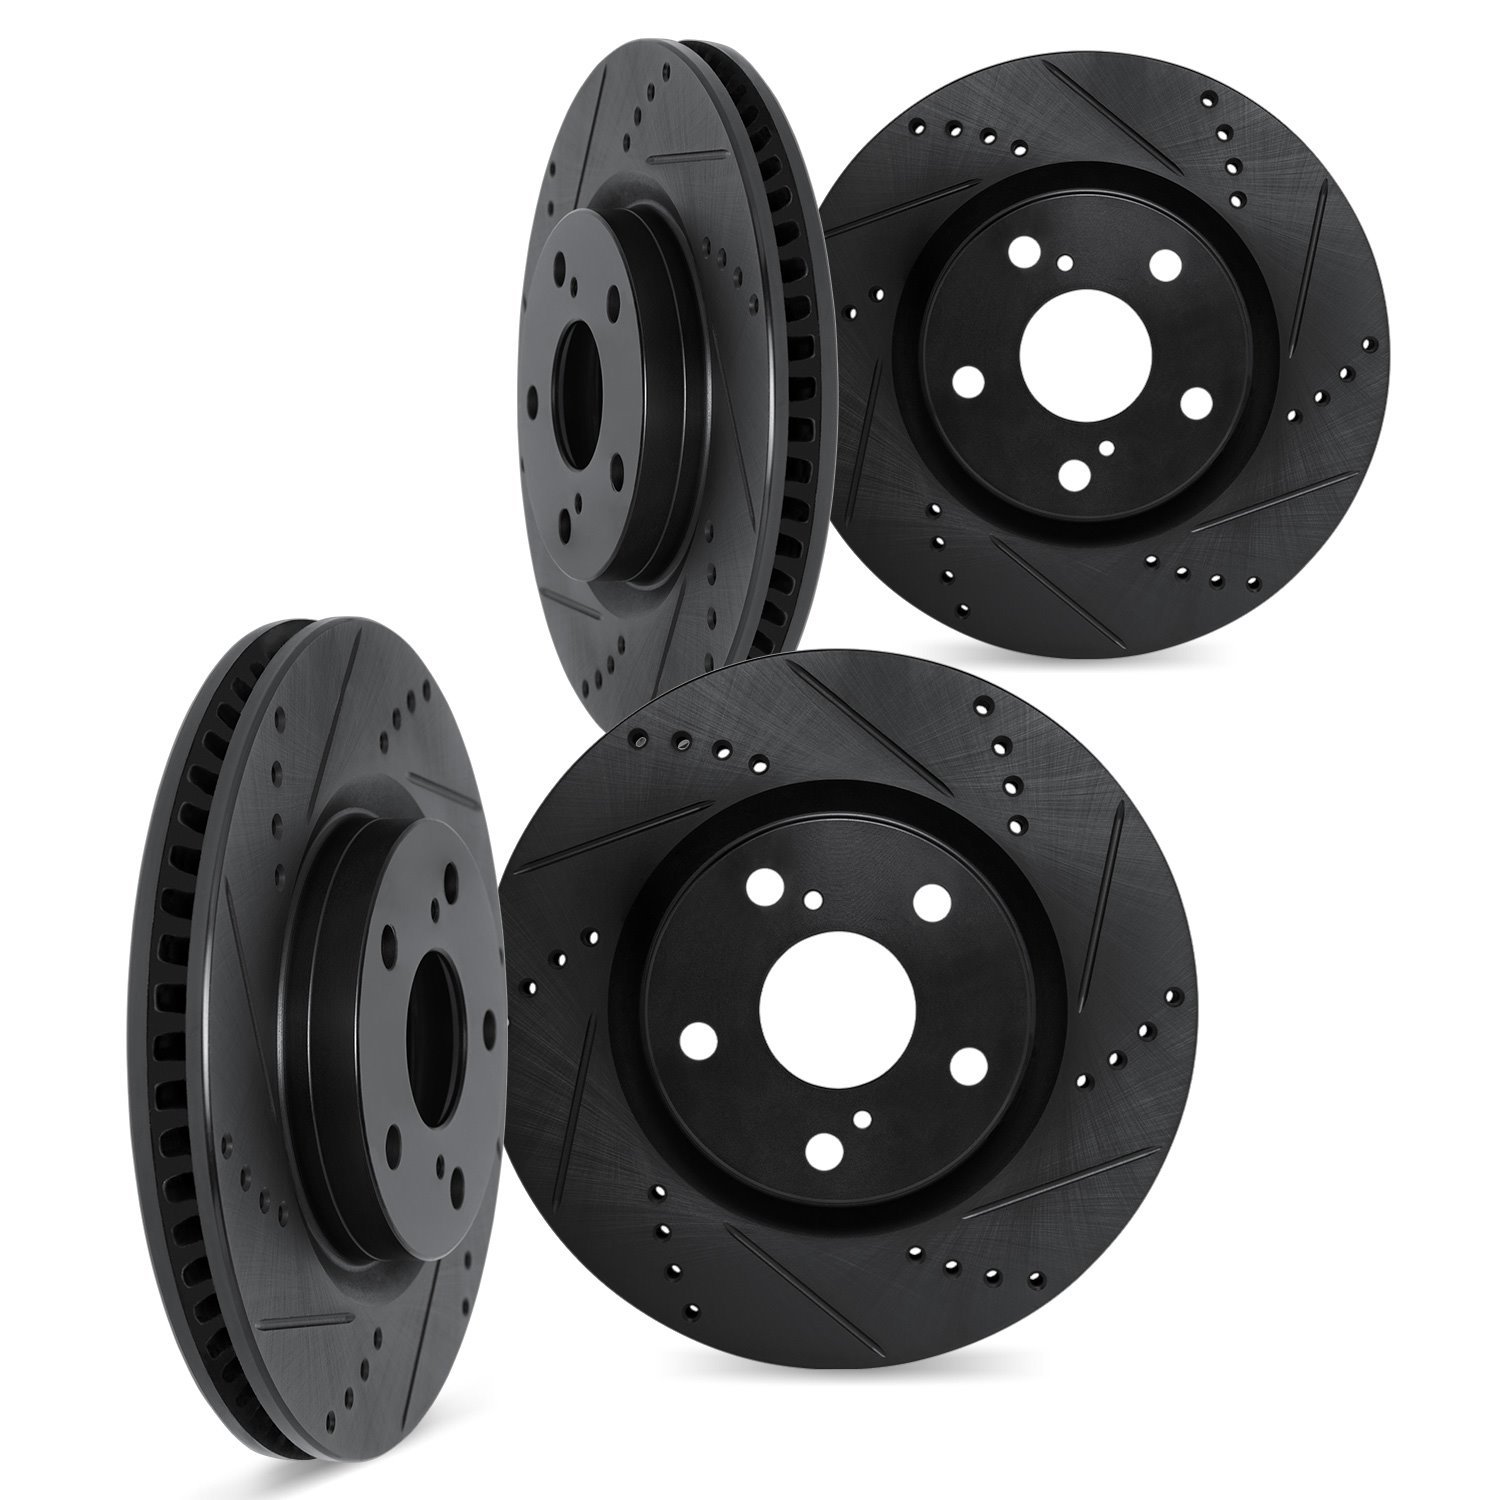 8004-02003 Drilled/Slotted Brake Rotors [Black], 1989-1997 Porsche, Position: Front and Rear